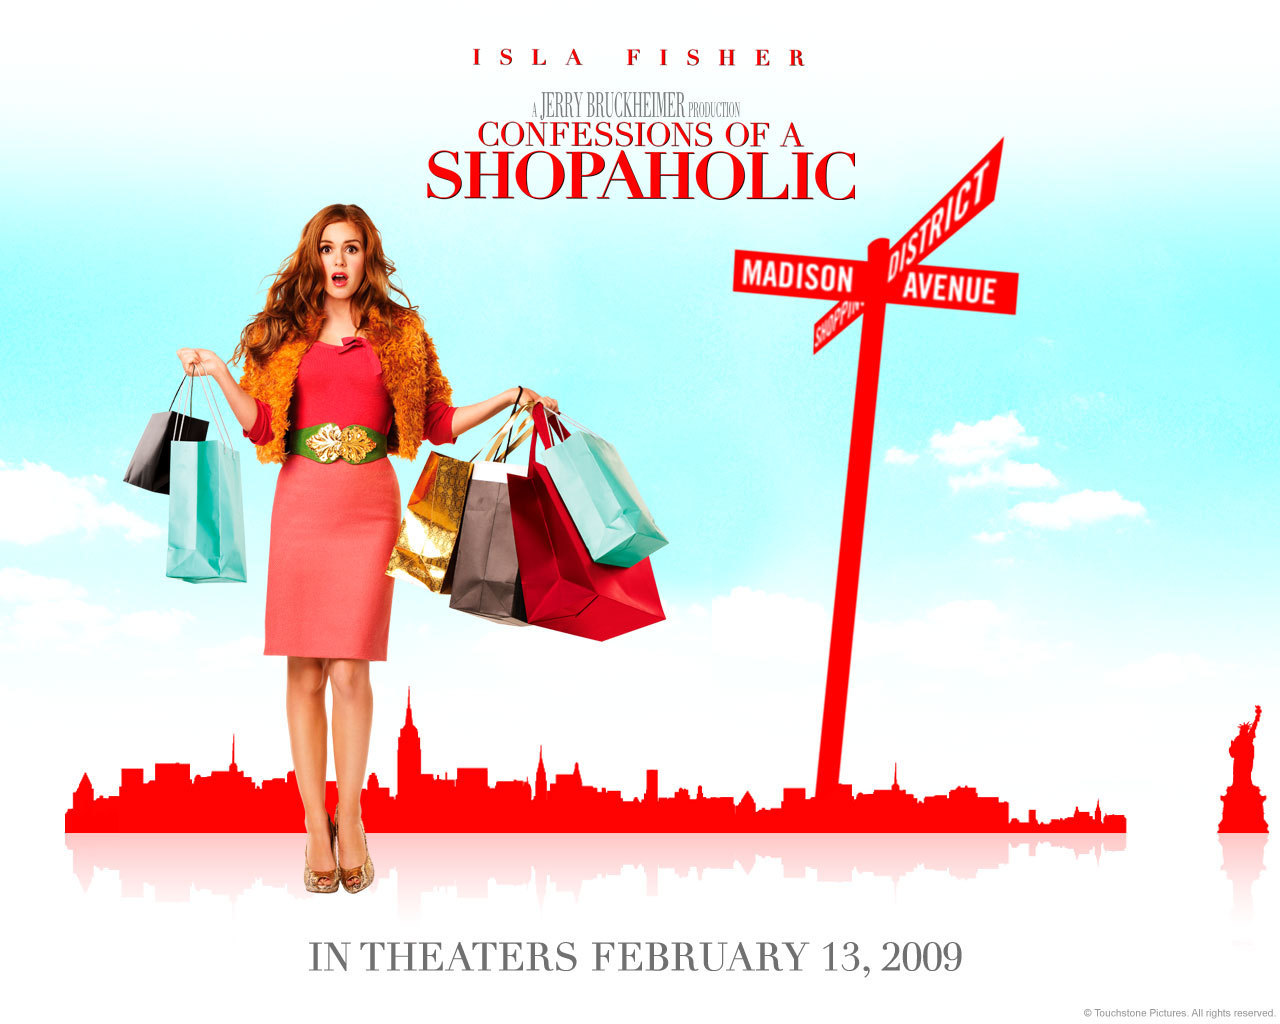 Confessions of a Shopaholic movies in Australia